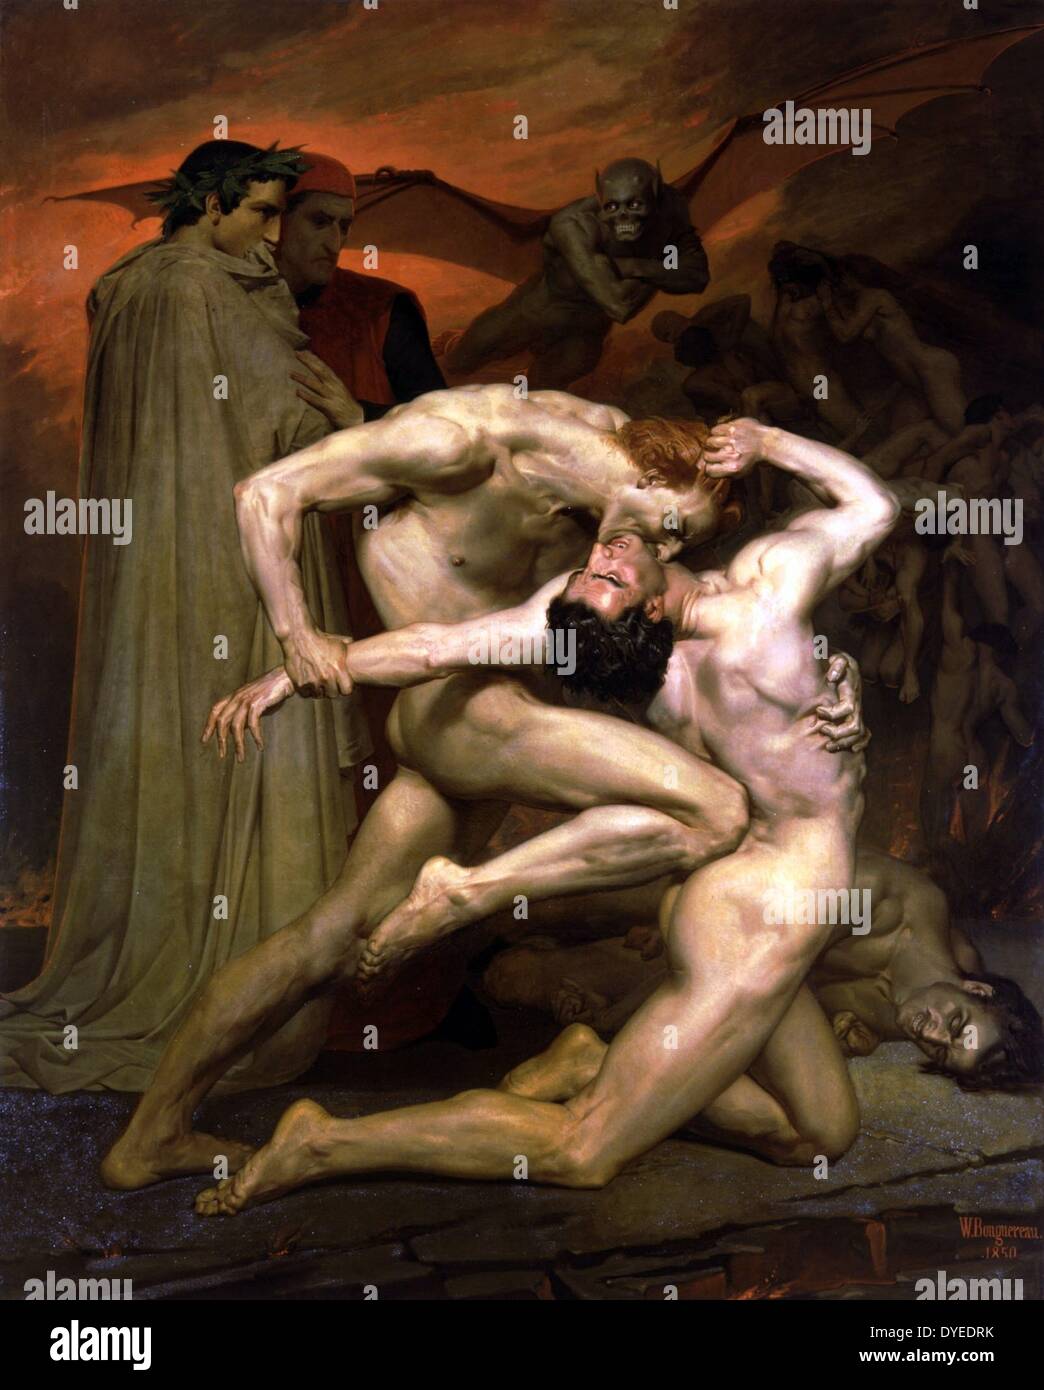 Dante And Virgil In Hell 1850. Painted by French artist William-Adolphe Bouguereau. Oil on Canvas Stock Photo